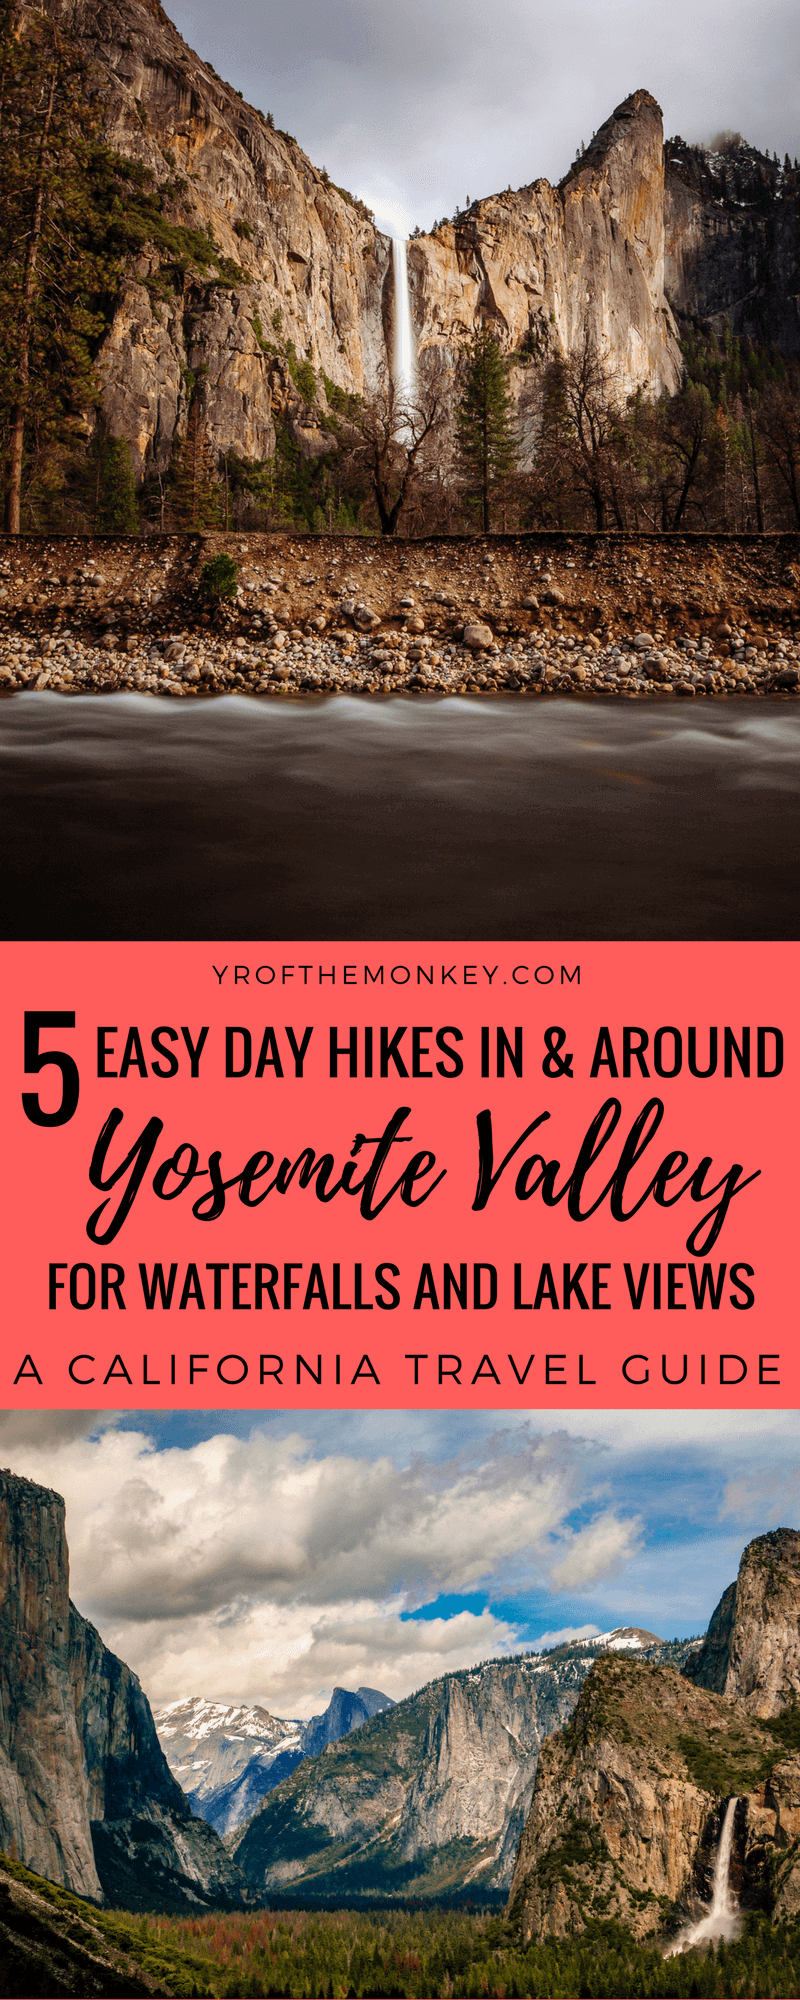 Looking for easy Yosemite hikes to see some gorgeous waterfalls and other attractions in Yosemite National Park, California? This post with 5 such easy to moderate day hikes in and around Yosemite valley has you covered if you are a non hiker! Includes a hike to a secret waterfall where there is practically no one! Pin this post to your California or US national parks board! #yosemitenationalpark #yosemitehiking #easydayhikes #californiatravel #USA #USnationalparks